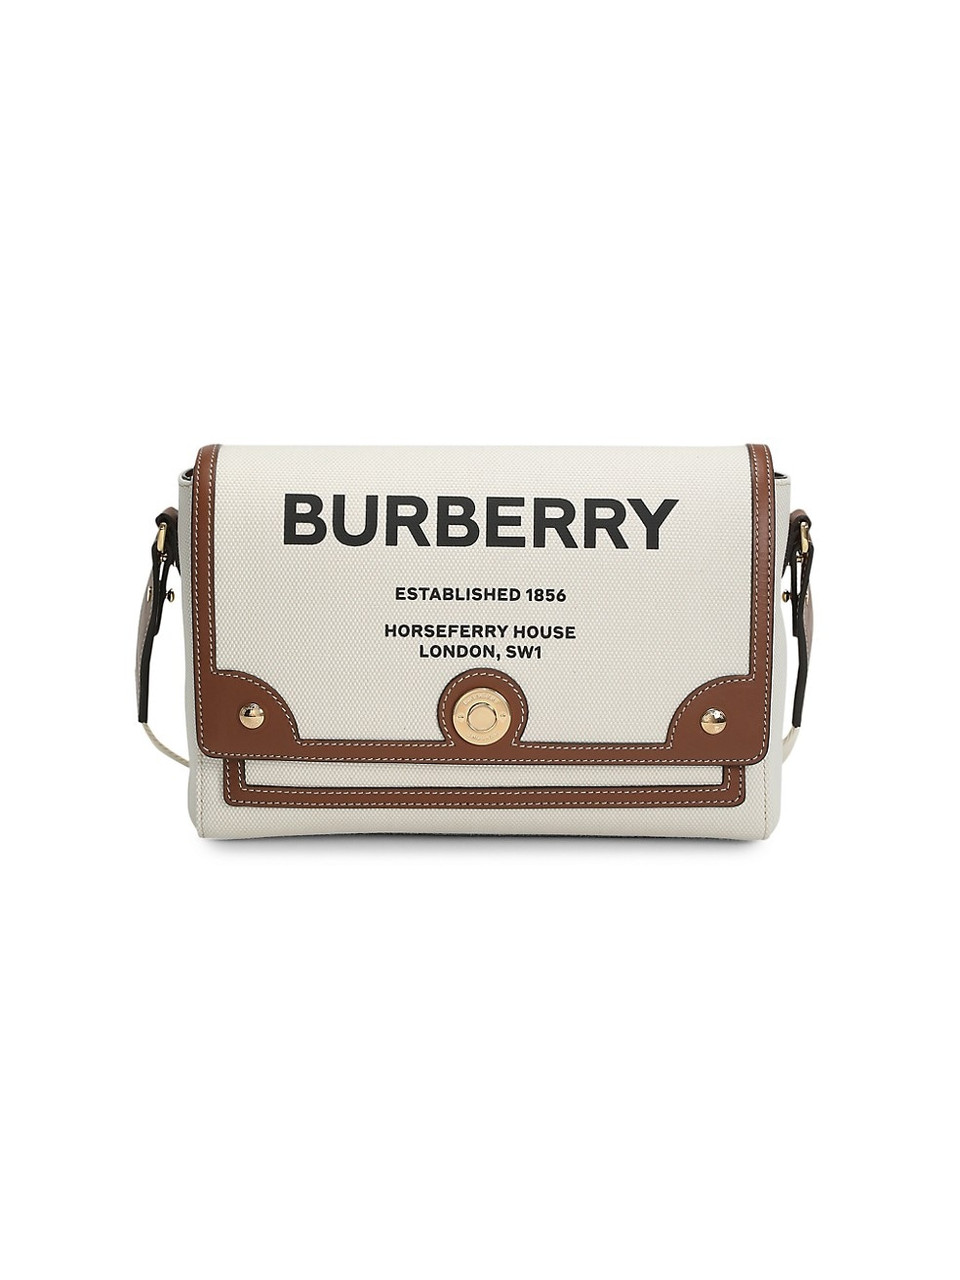 Burberry Handbags Outlet shop 2022 New How much are Burberry bags in  Bicester UK#bicestervillage - YouTube